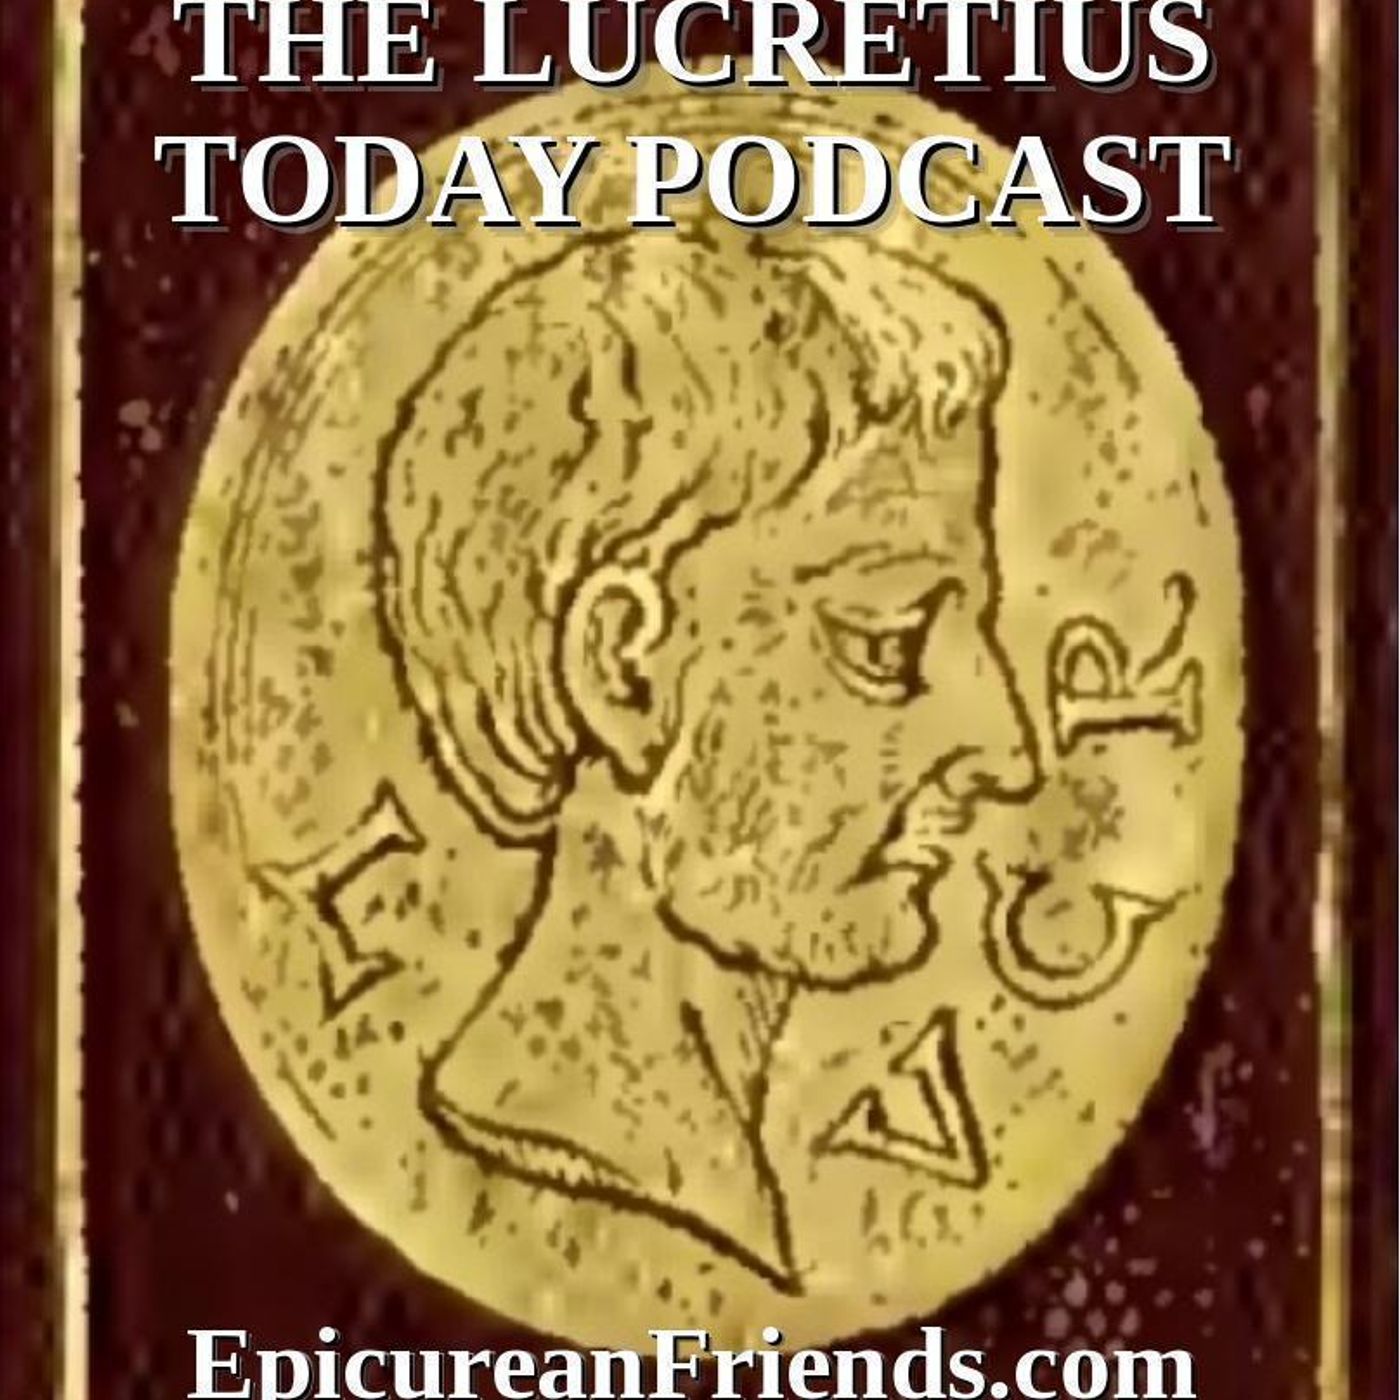 Episode 220 - Cicero's On Ends - Book Two - Part 27 -Cicero Attacks Epicurus' End-Of-Life Decisionmaking